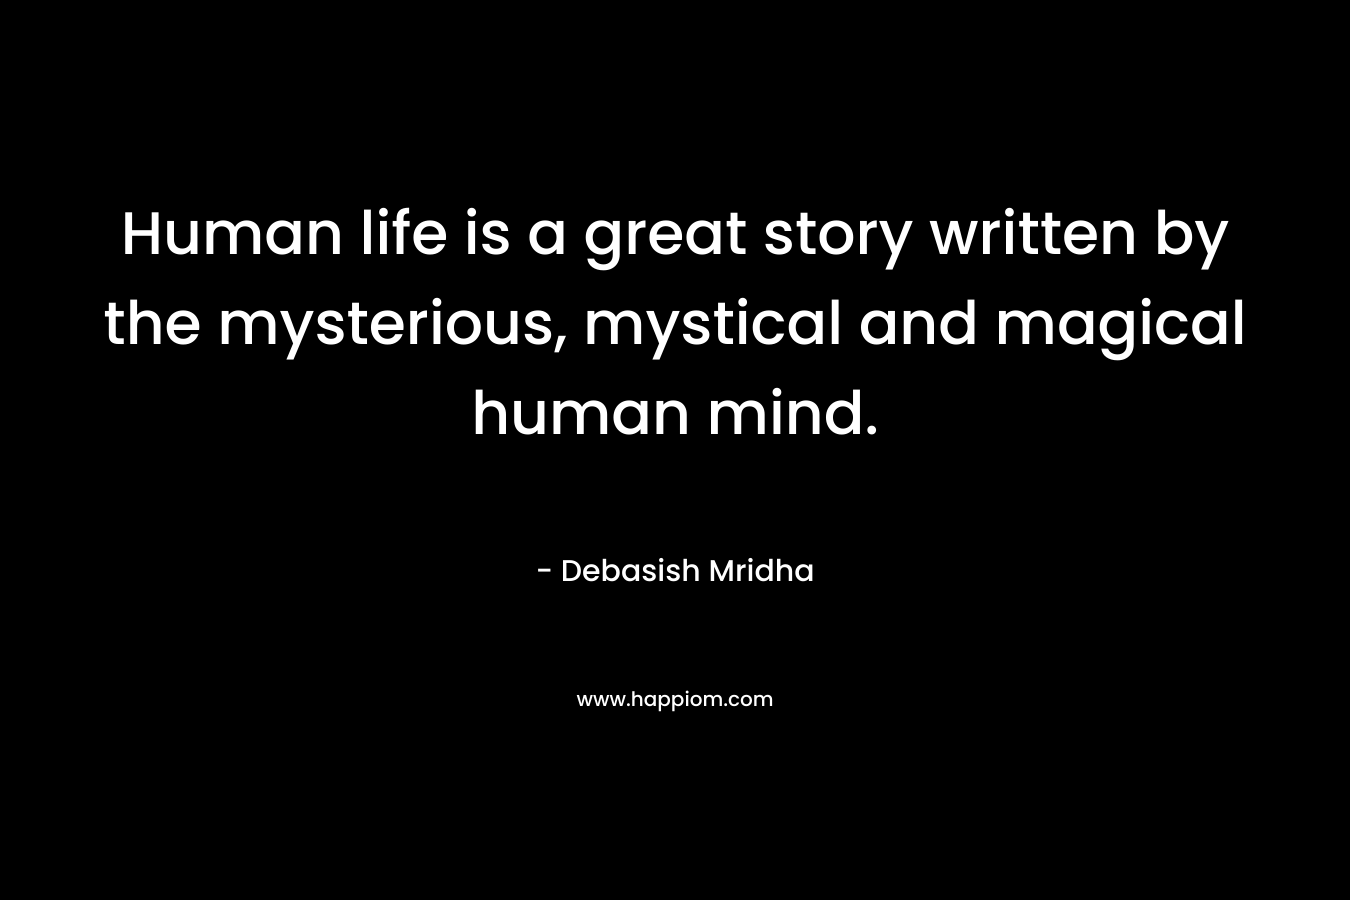 Human life is a great story written by the mysterious, mystical and magical human mind.